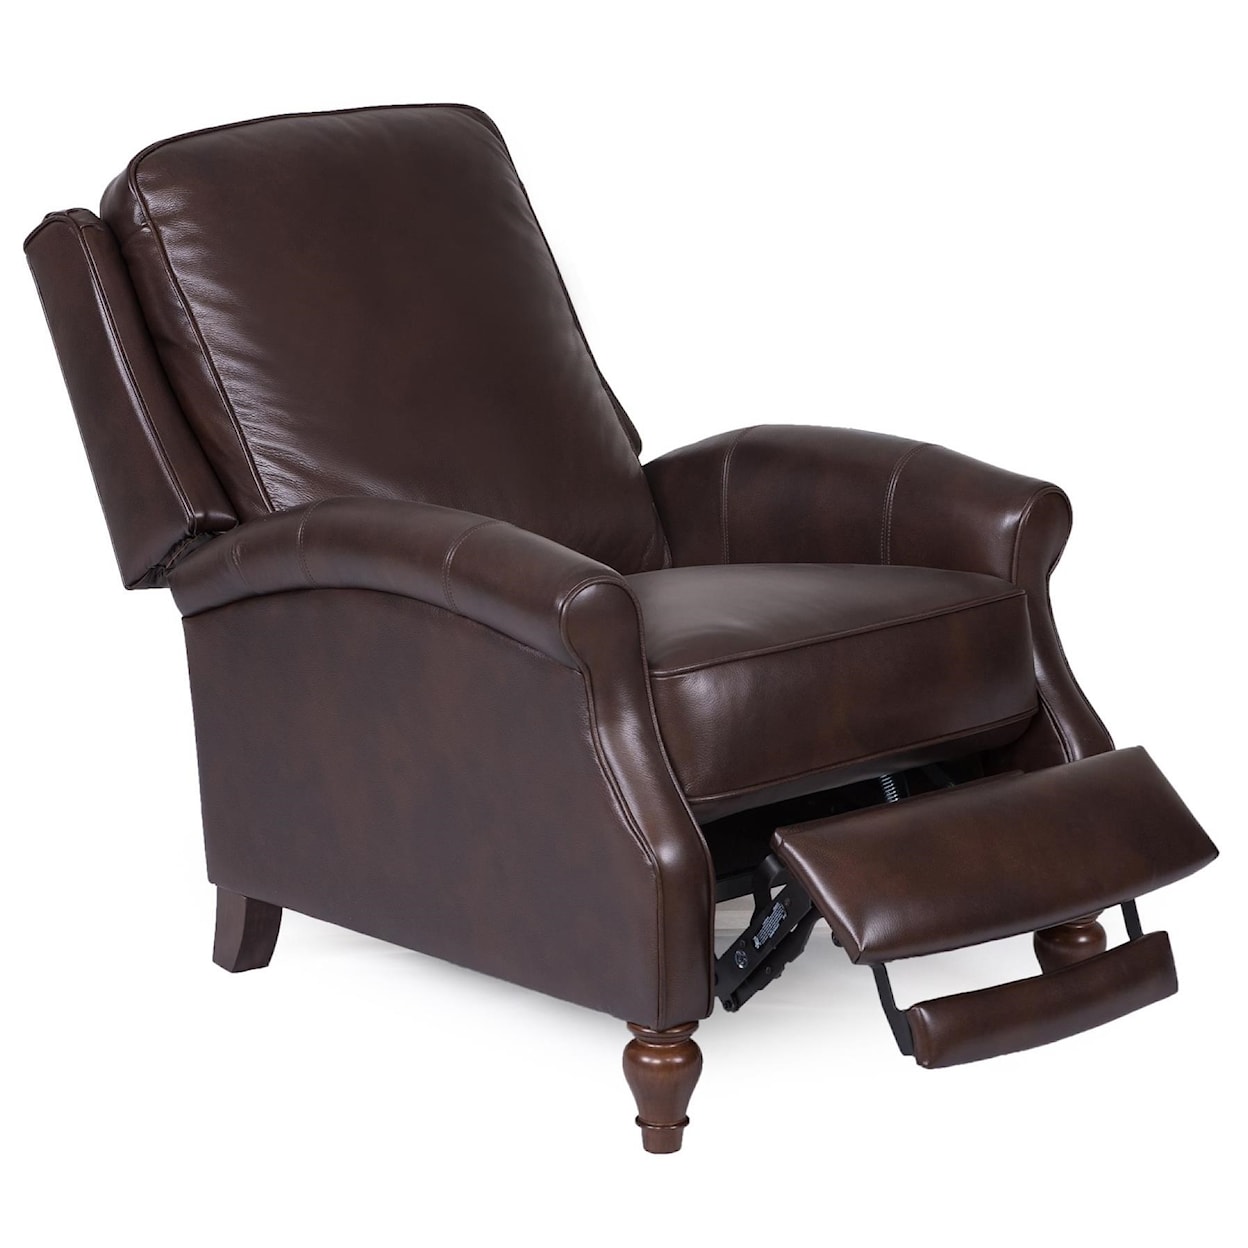 Synergy Home Furnishings 1267 3-Way Push Back Recliner